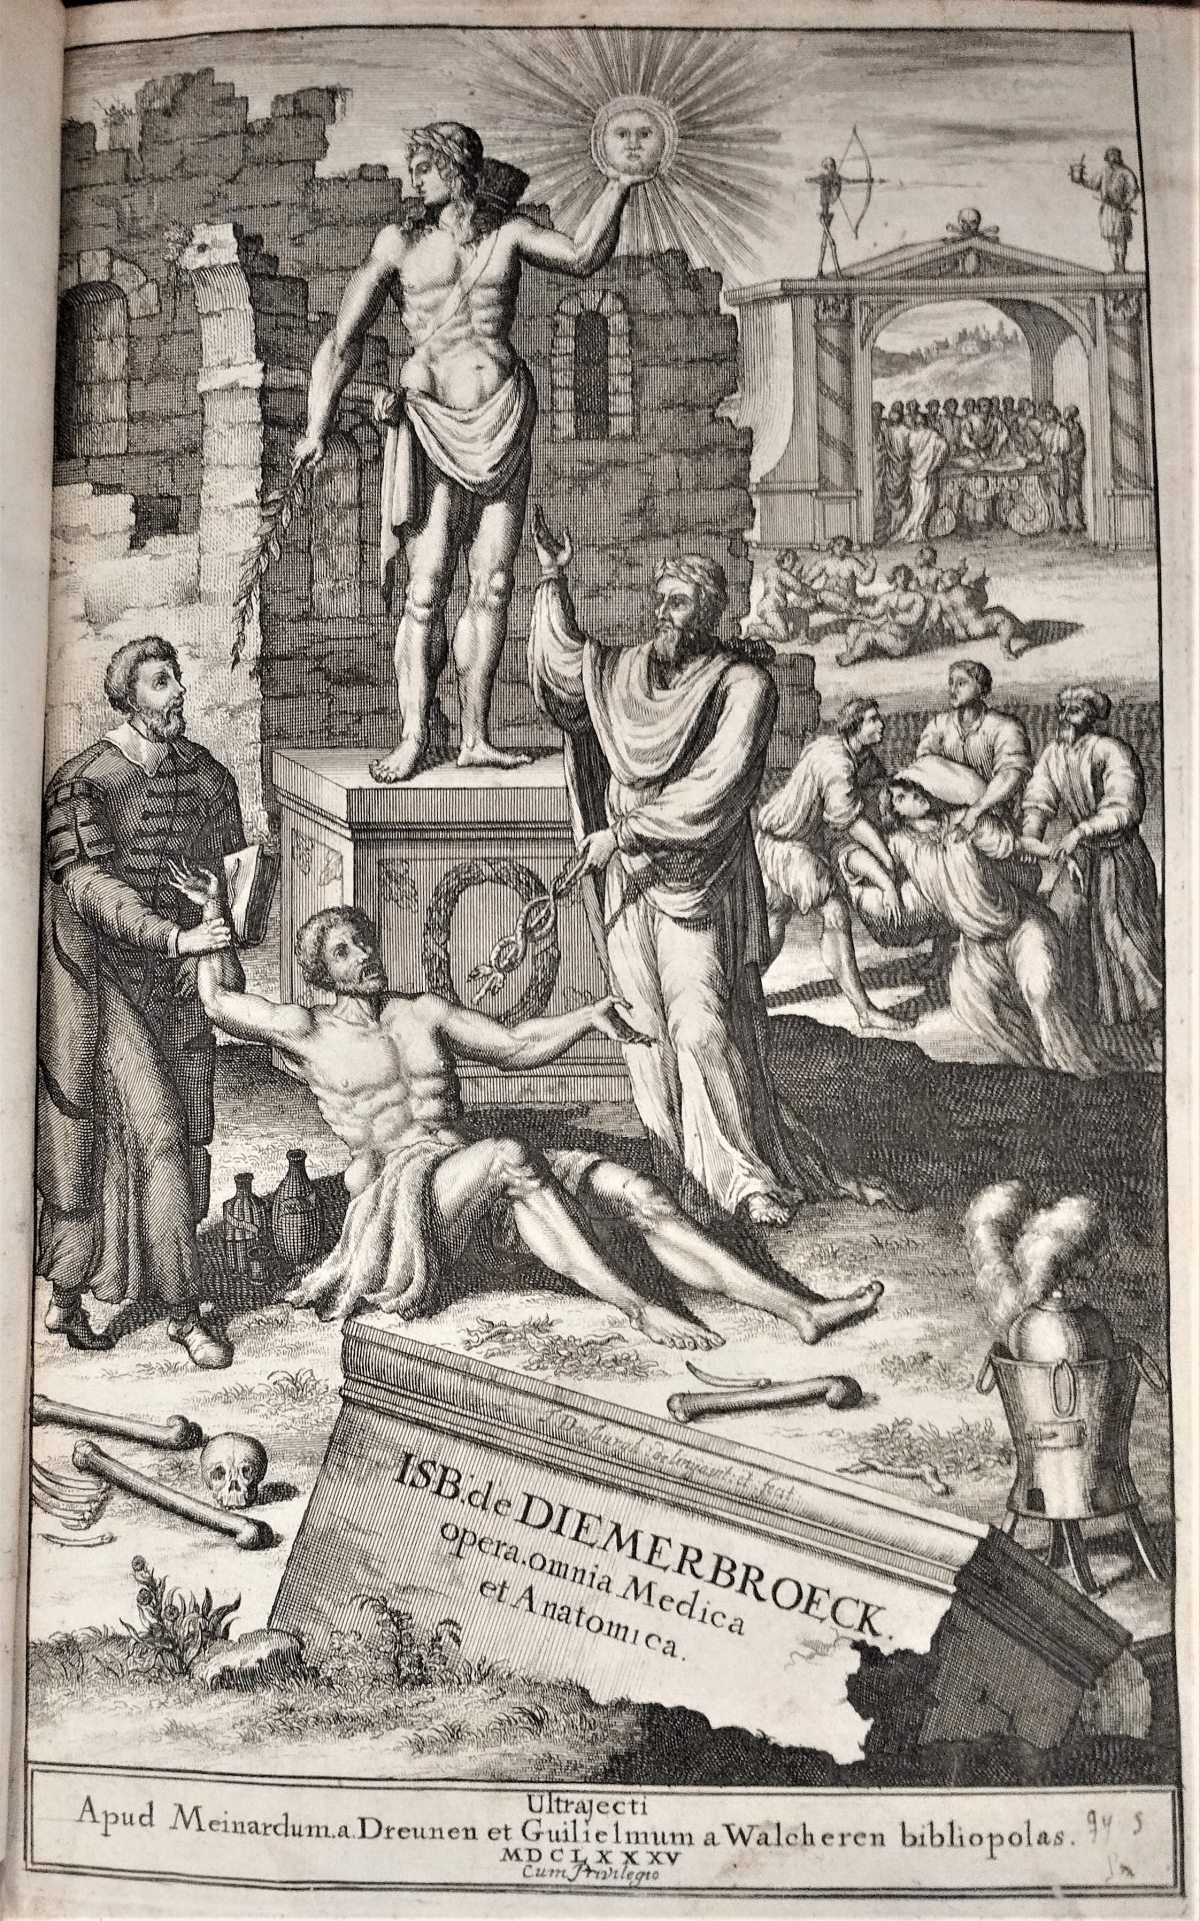 Engraved title page with various human figures and tools related to medicine. 